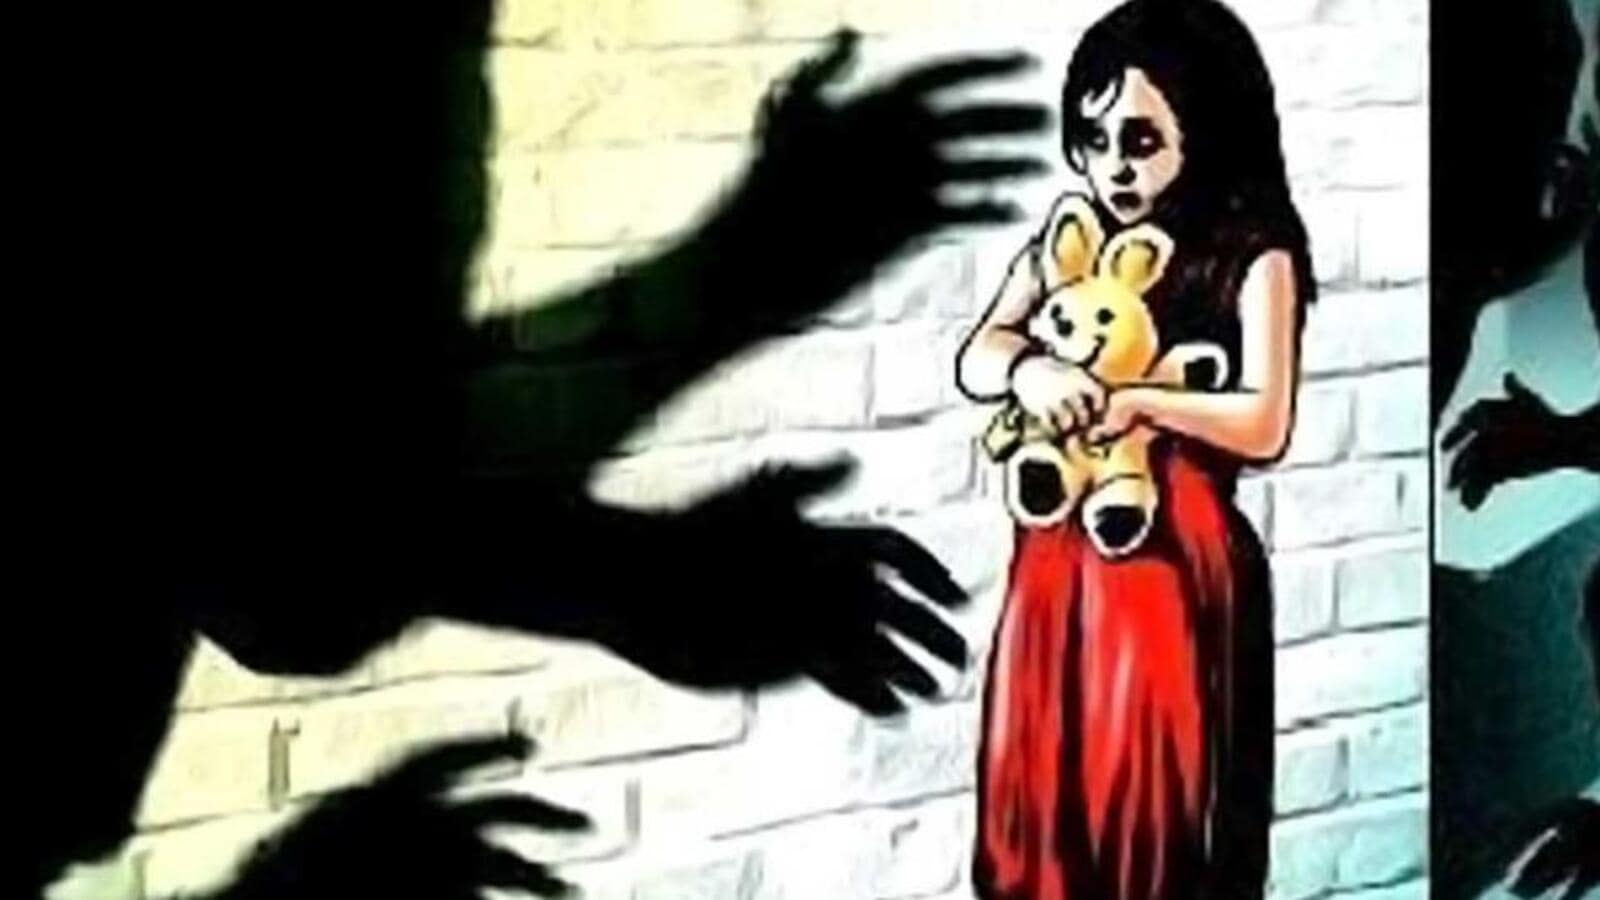 8 men rape, film and blackmail 17-year-old Rajasthan girl. Then release  video - Hindustan Times